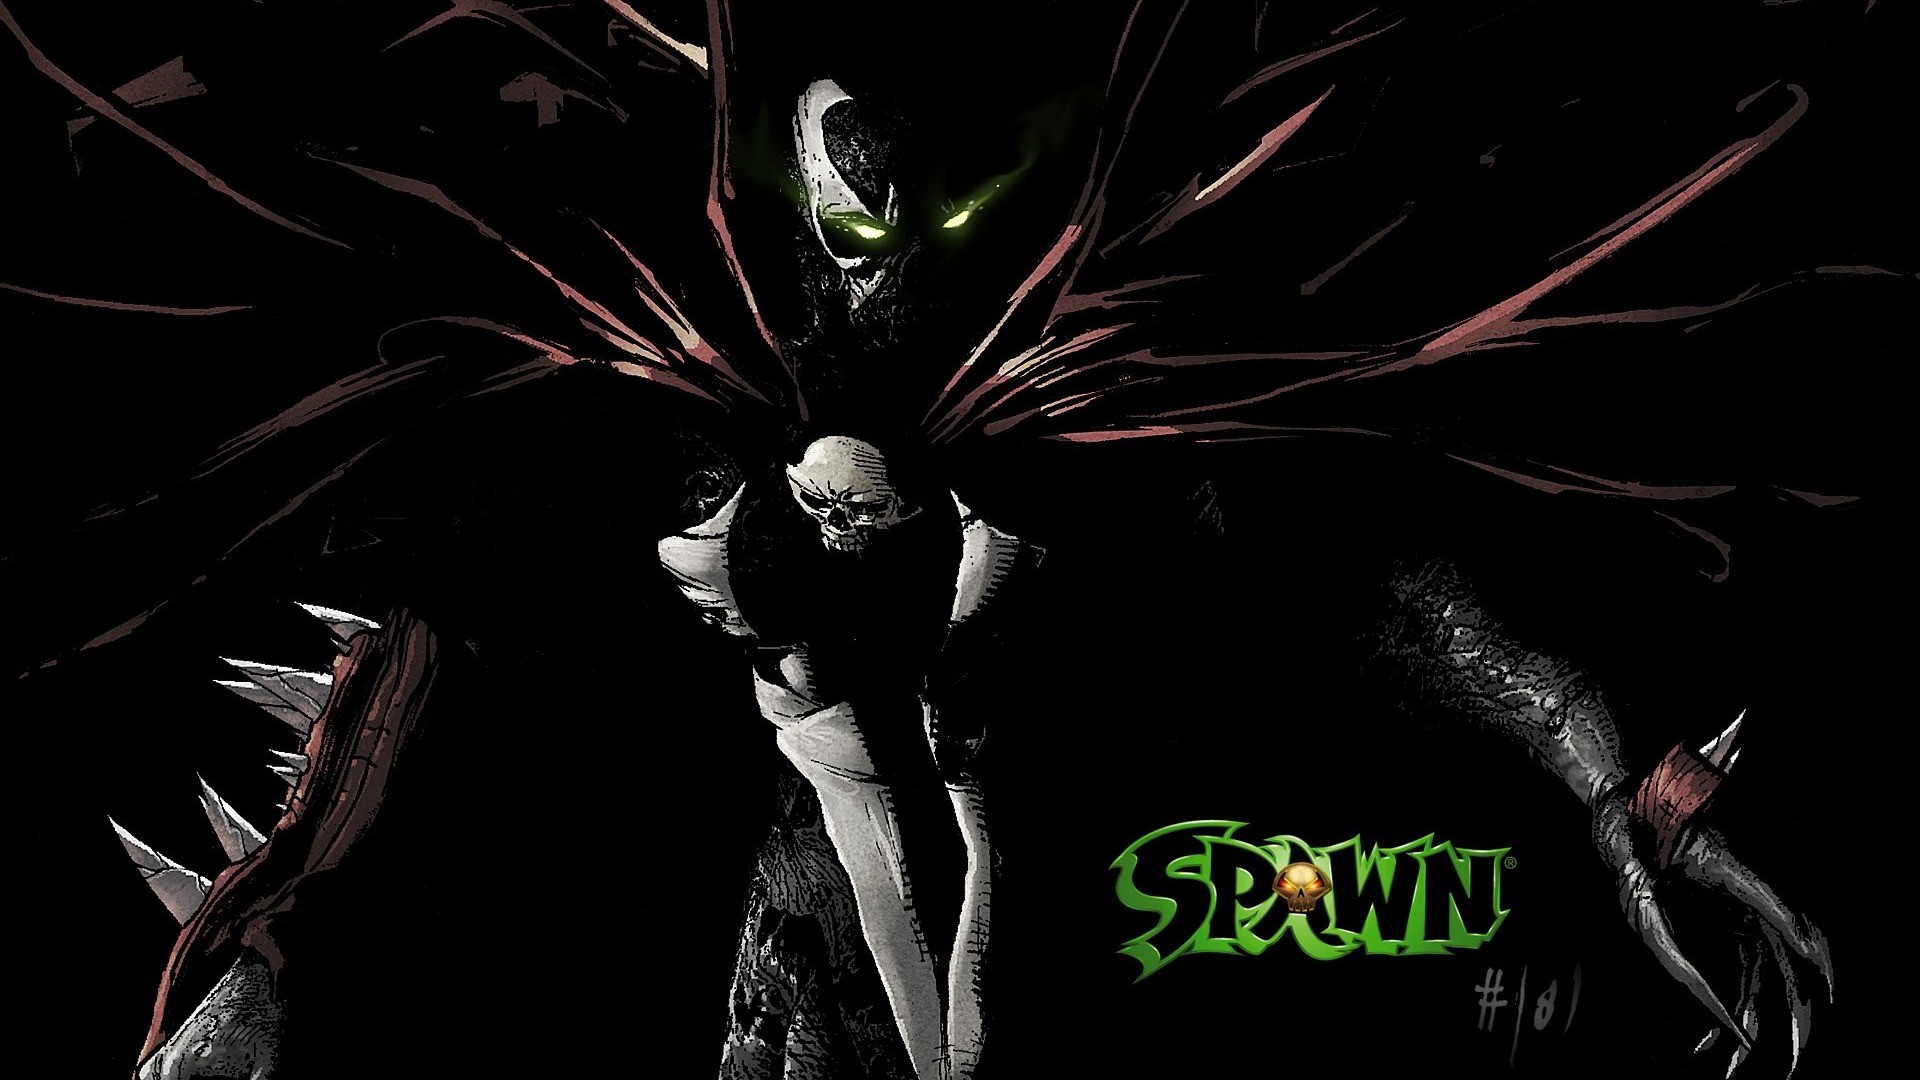 Spawn HD Wallpapers – 1920×1080